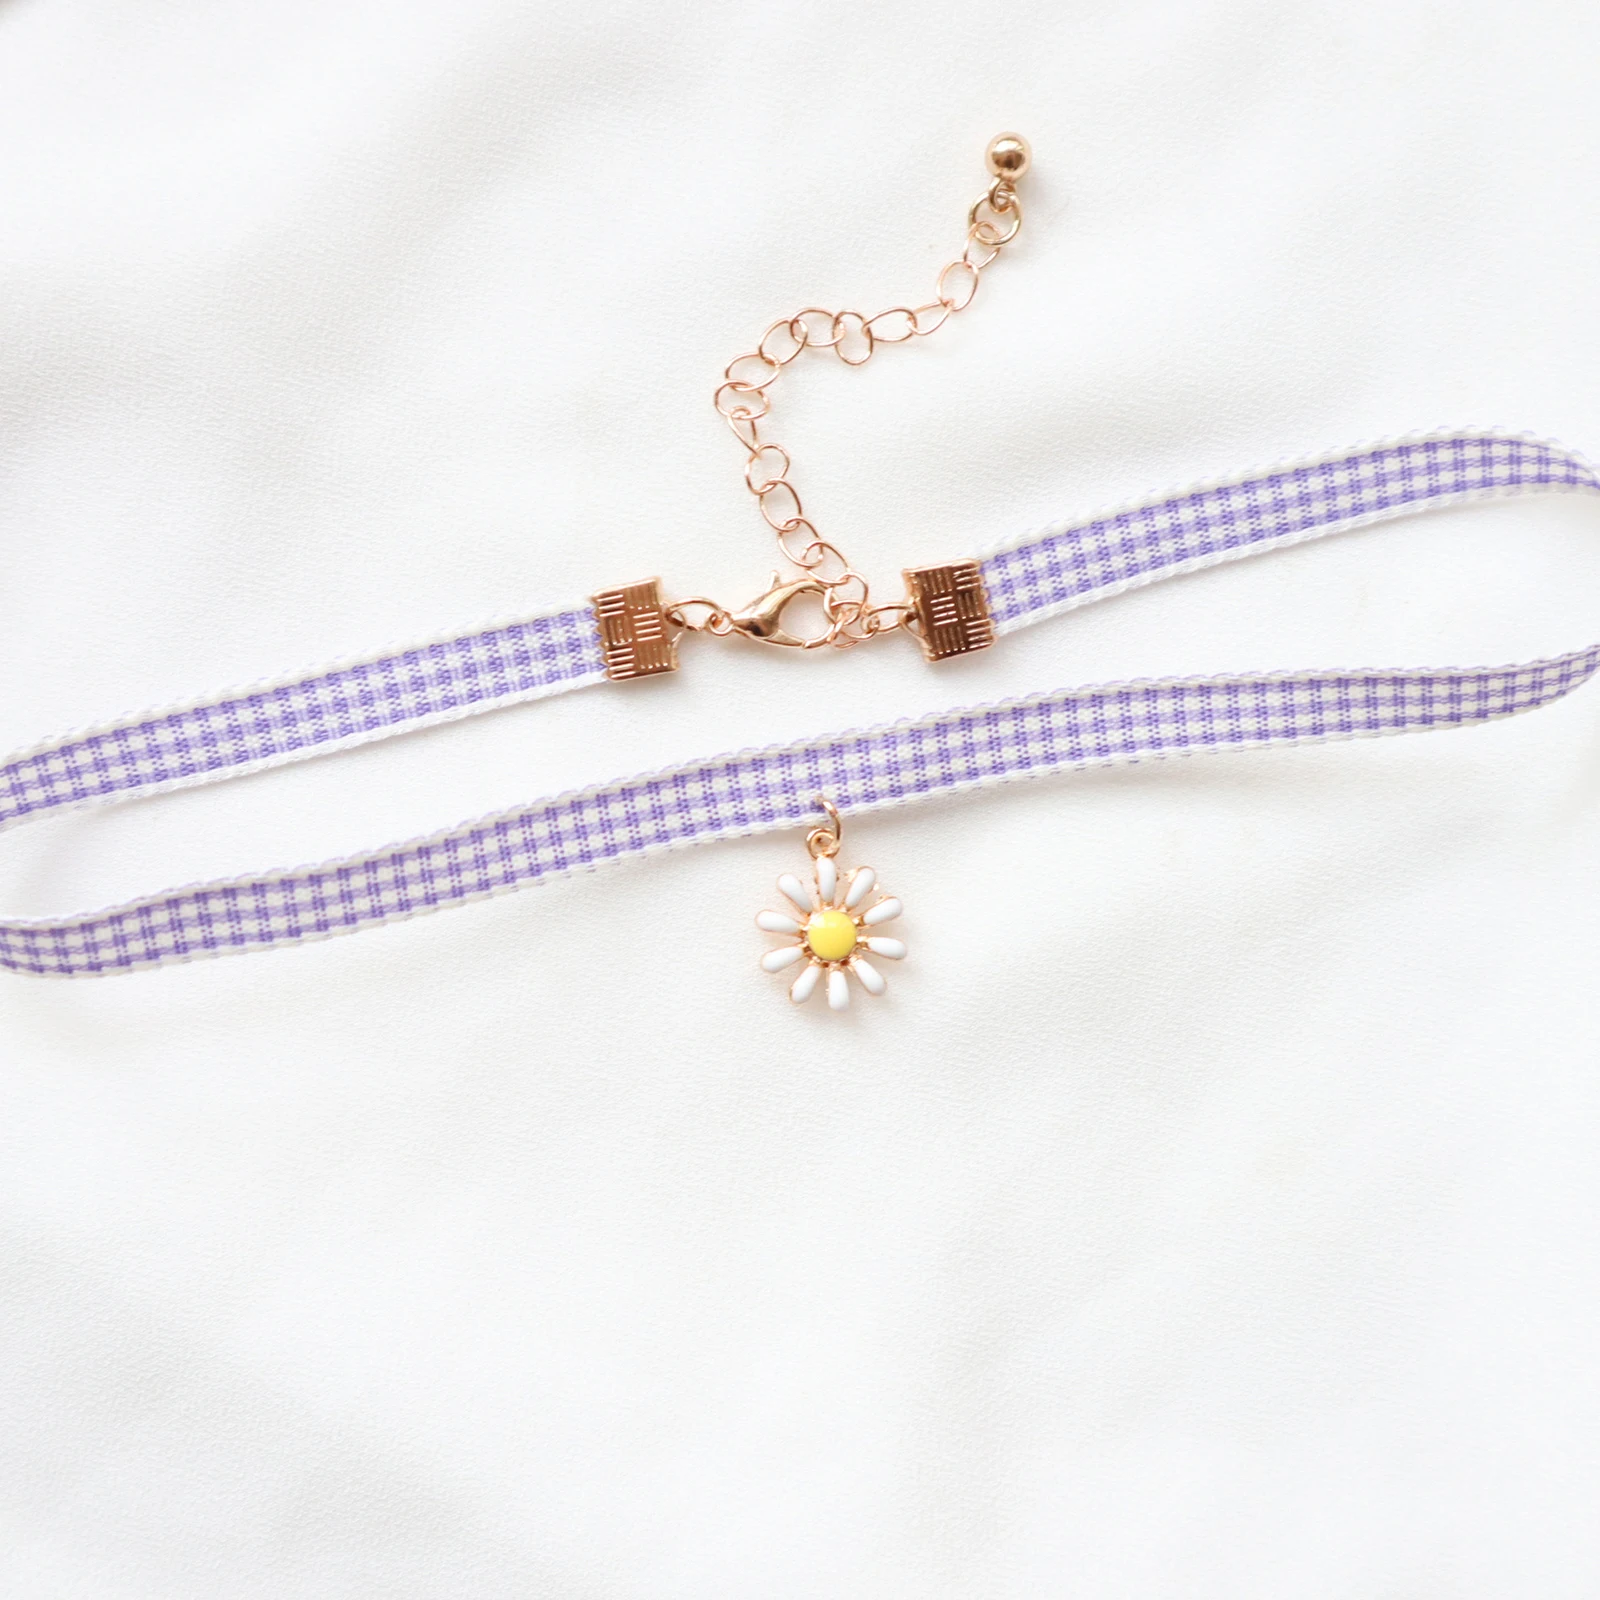 

Doreen Box Fabric Choker Clavicle Necklace Pale Lilac Heart Flower Women Wedding Party Romantic Sweet Collar Chains Jewelry,1PC